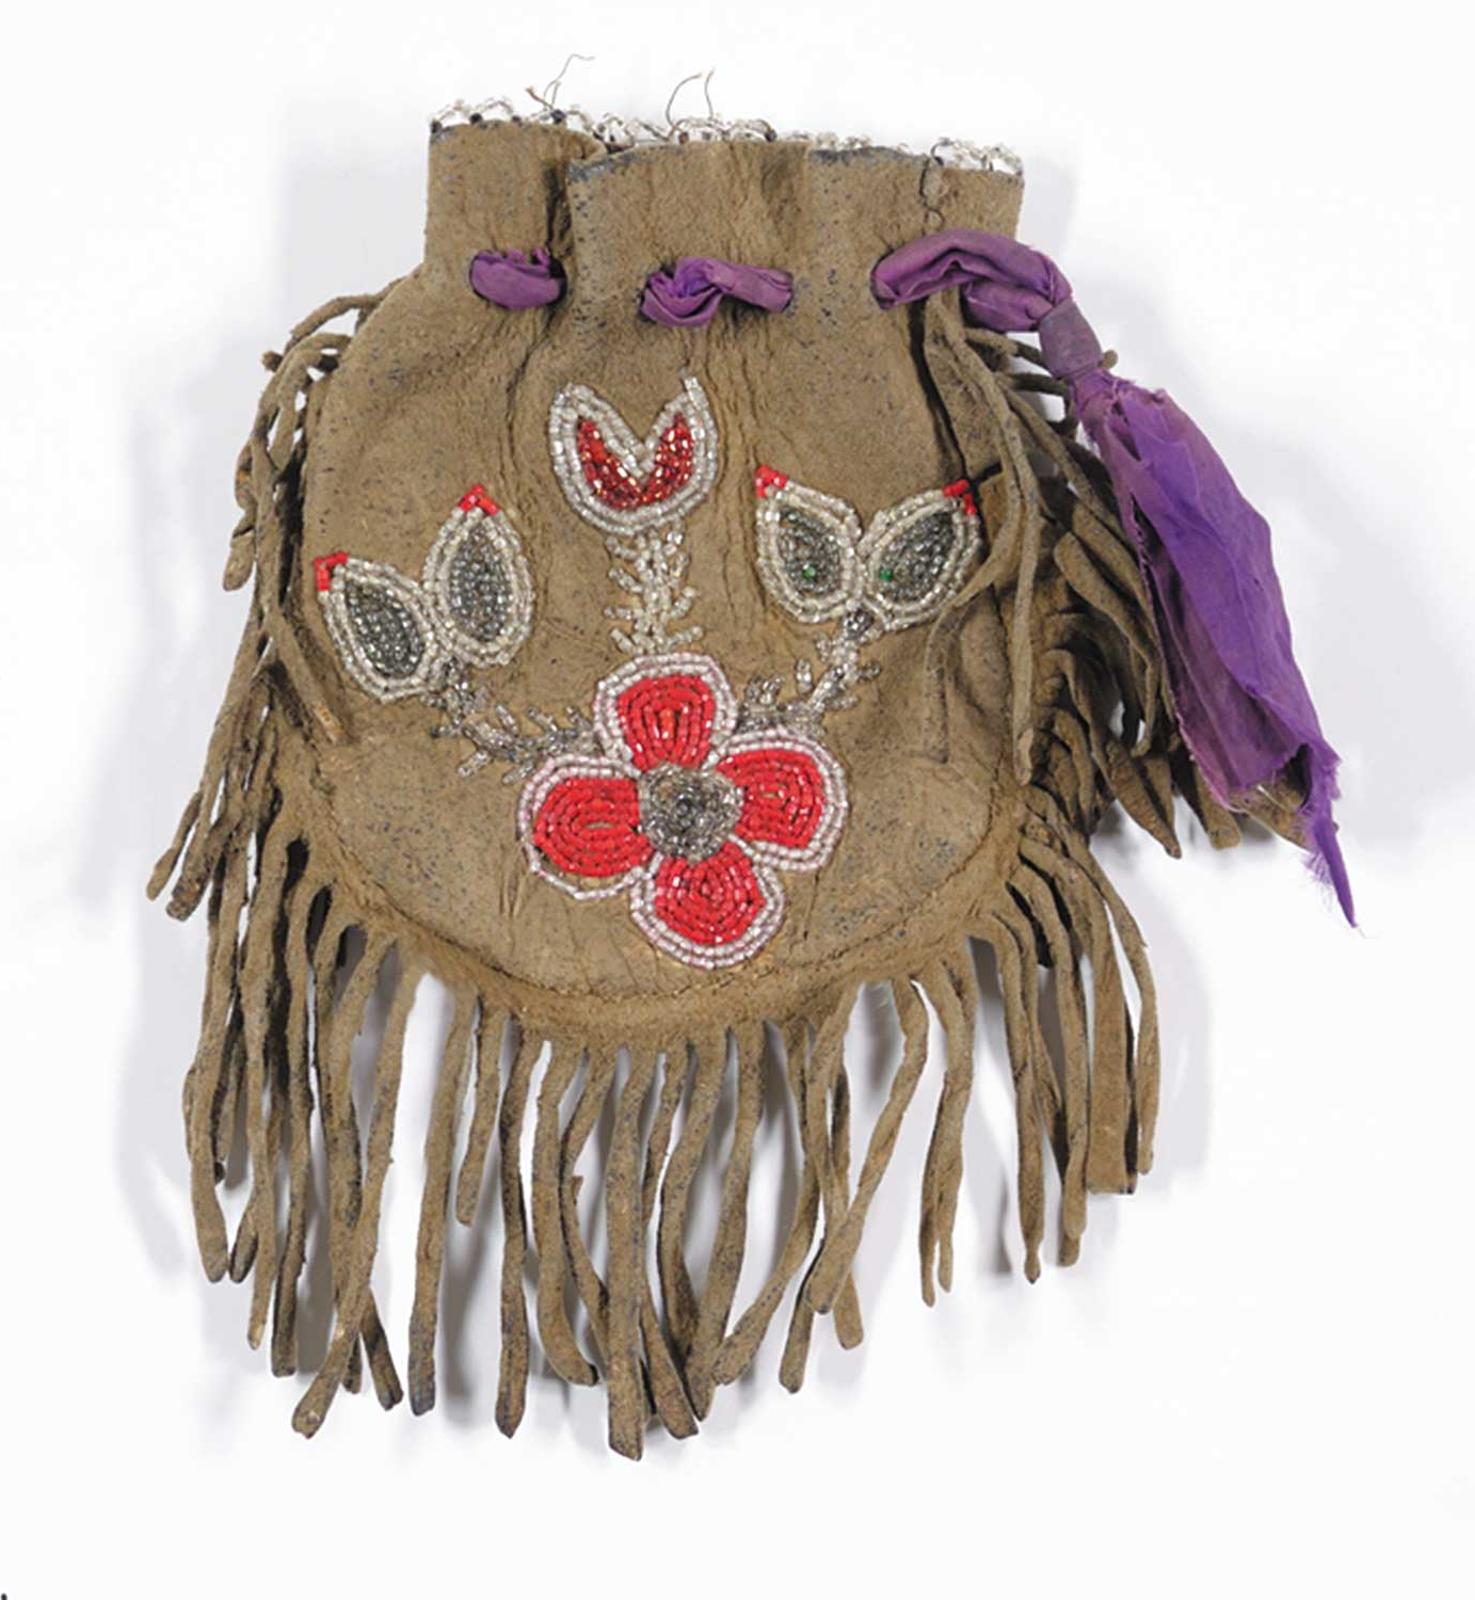 First Nations Basket School - Fringed, Beaded Pouch with Silk Drawstring